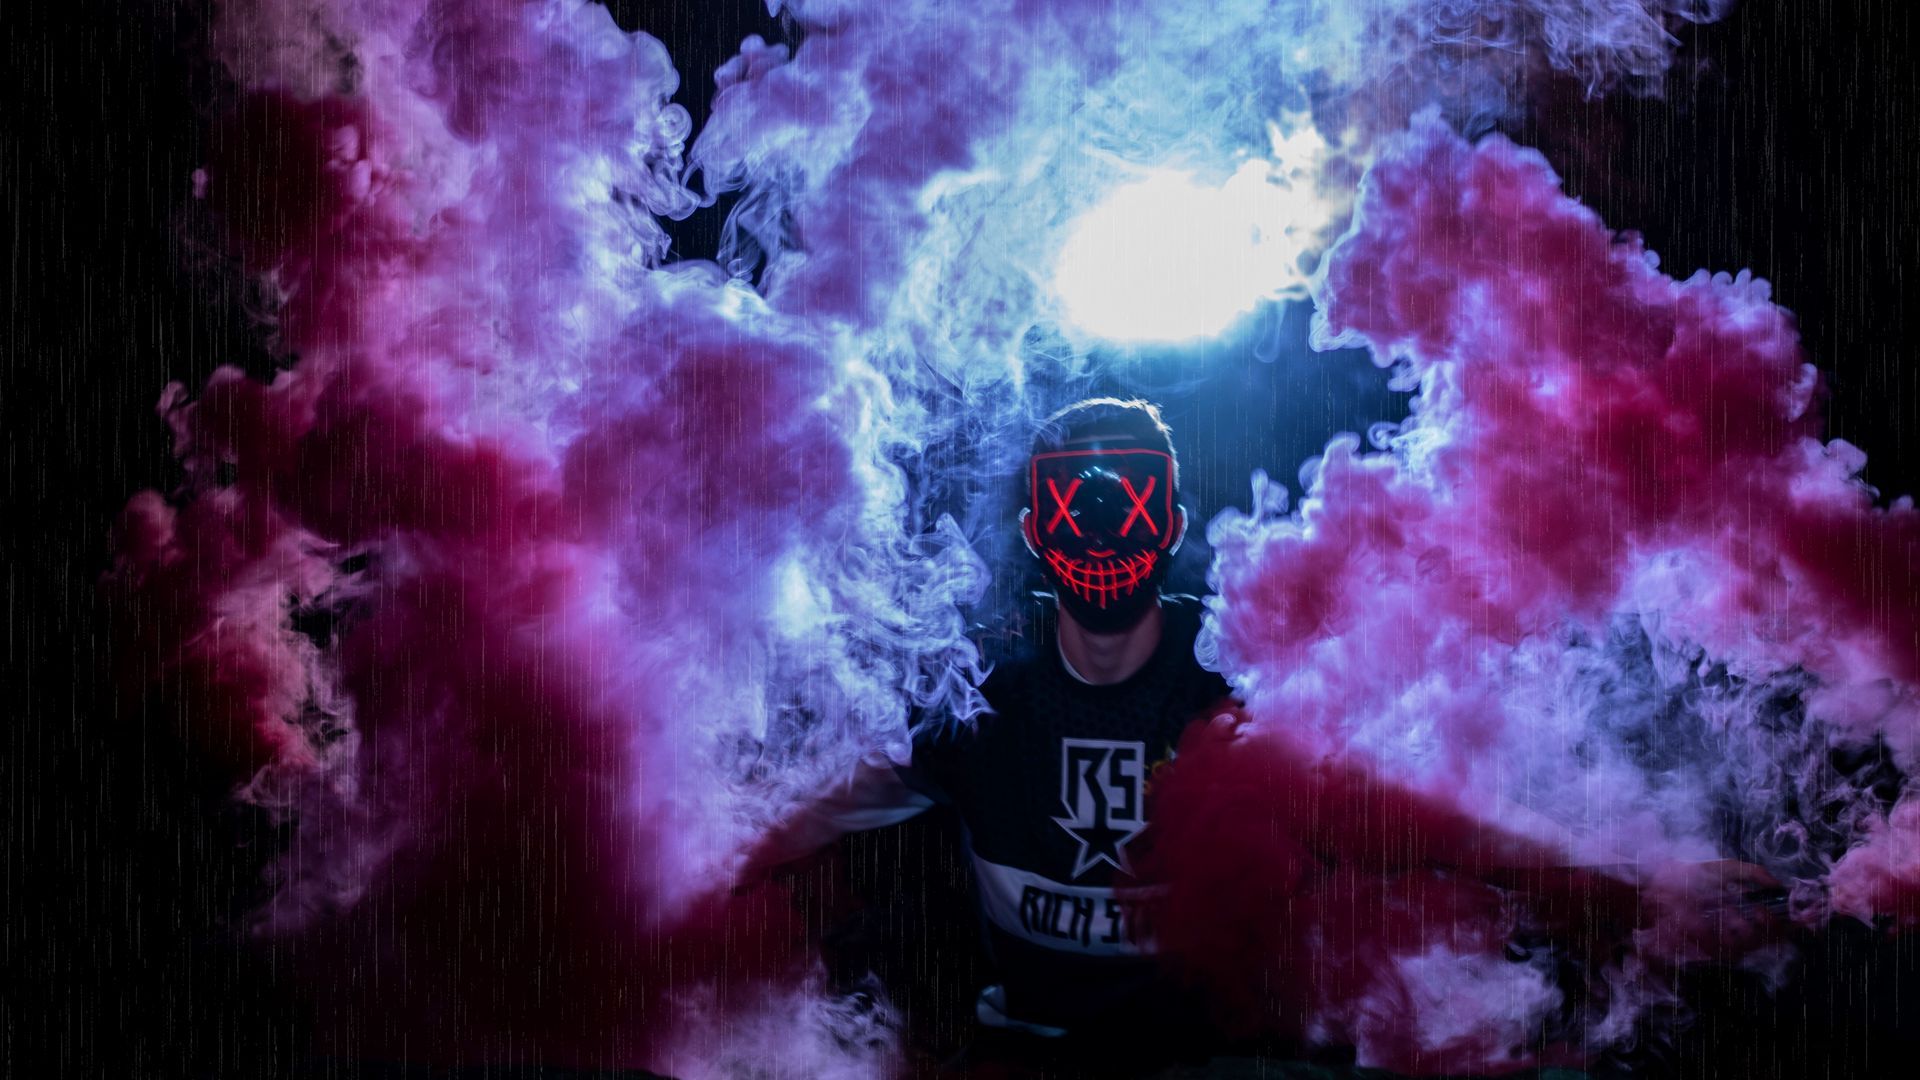 Download wallpaper 1920x1080 man, mask, colored smoke, anonymous full hd, hdtv, fhd, 1080p HD background